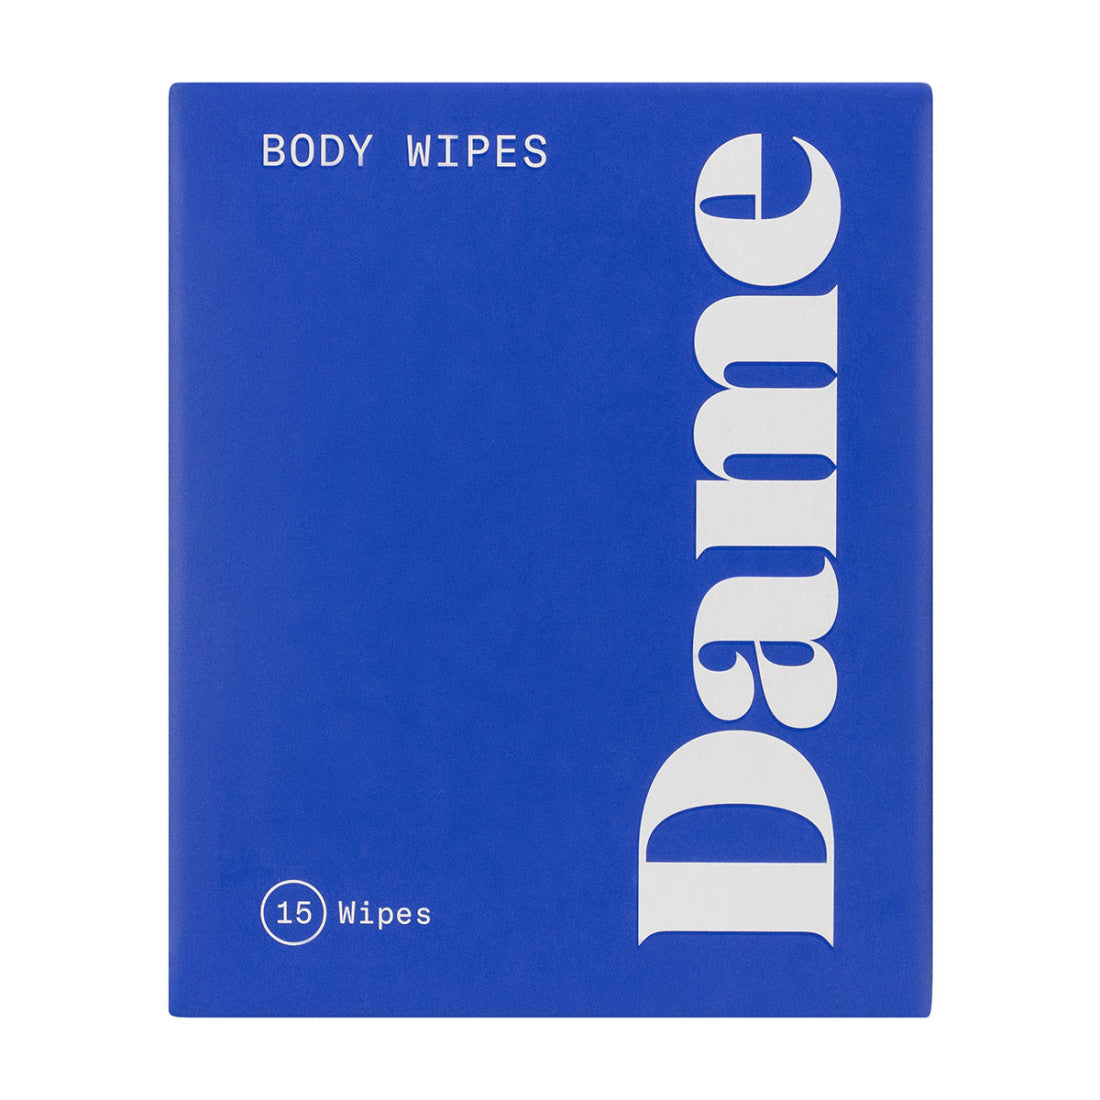 Dame Body Wipes - 15ct